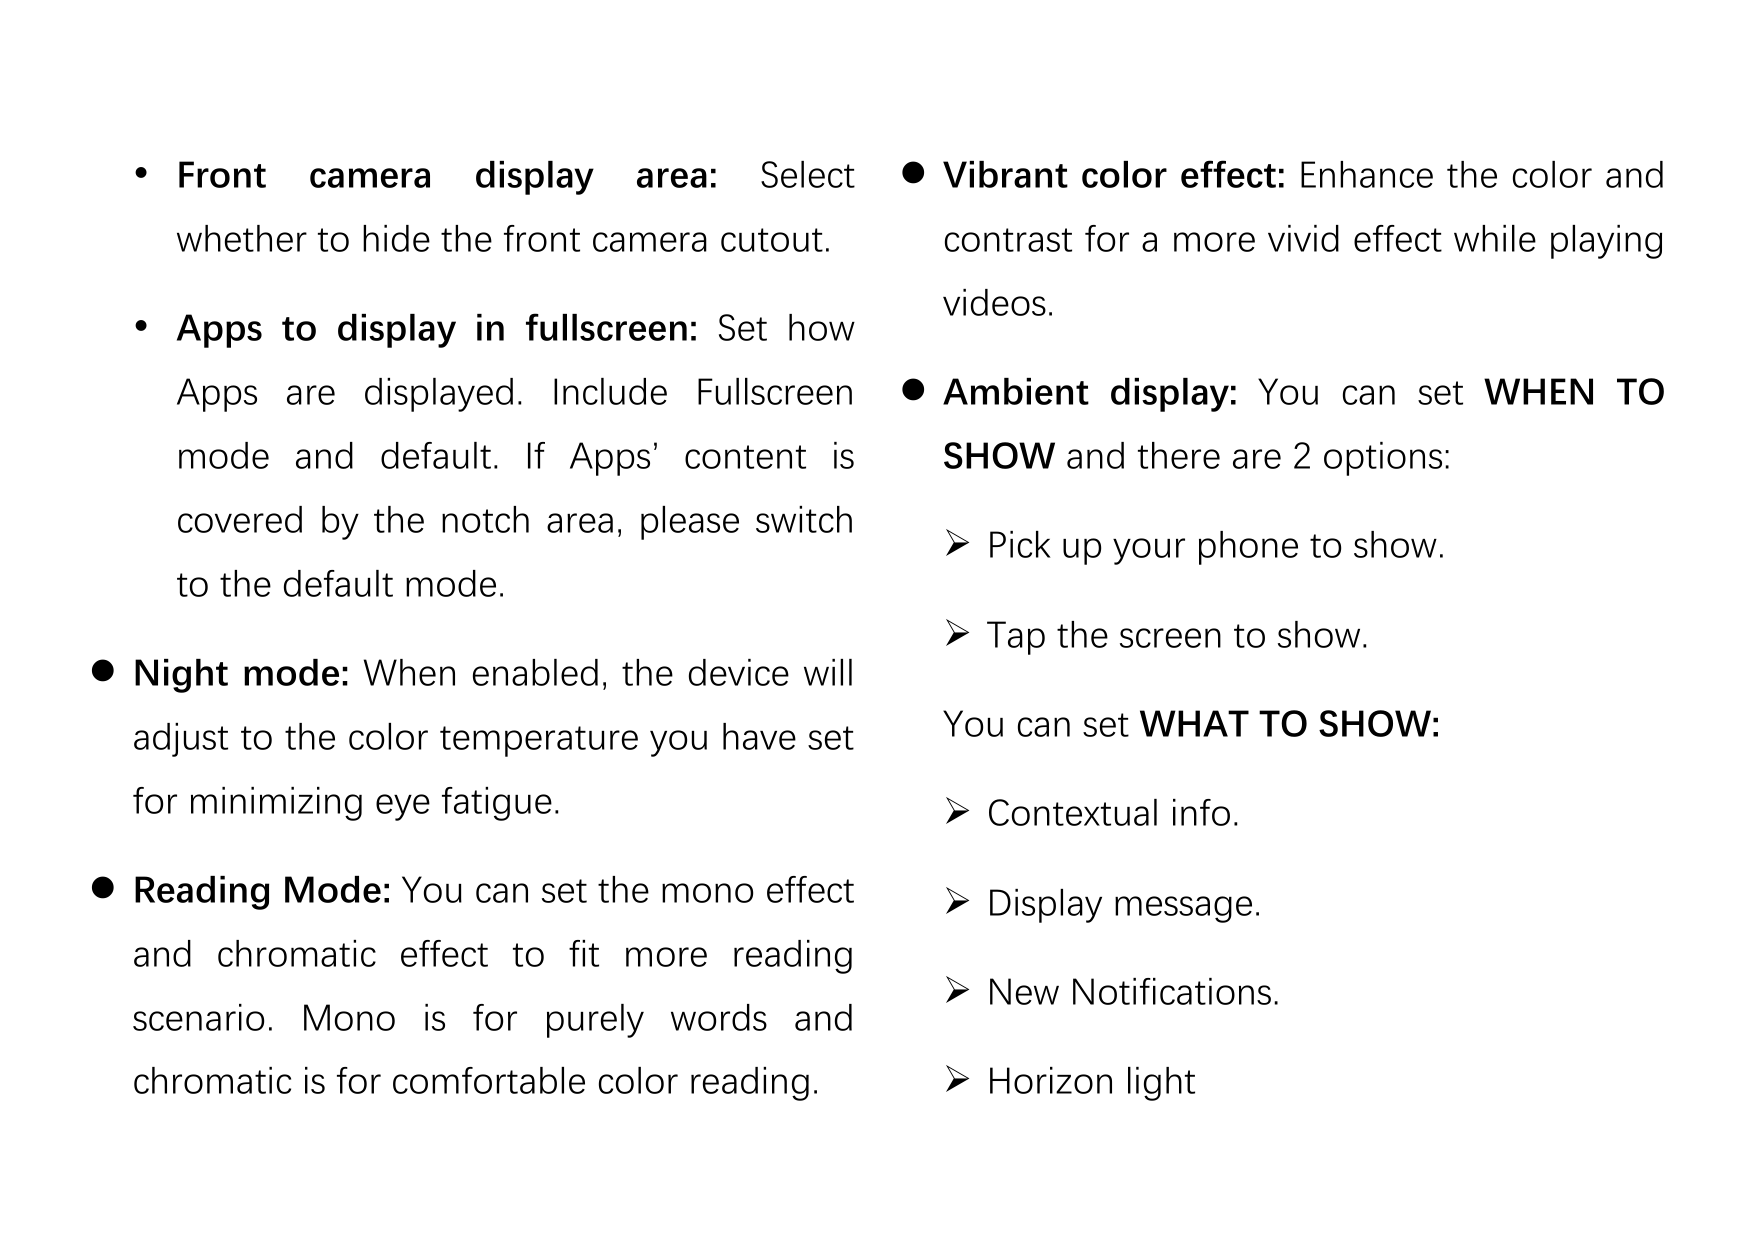  Frontcameradisplayarea:Selectwhether to hide the front camera cutout. Apps to display in fullscreen: Set howApps are displaye